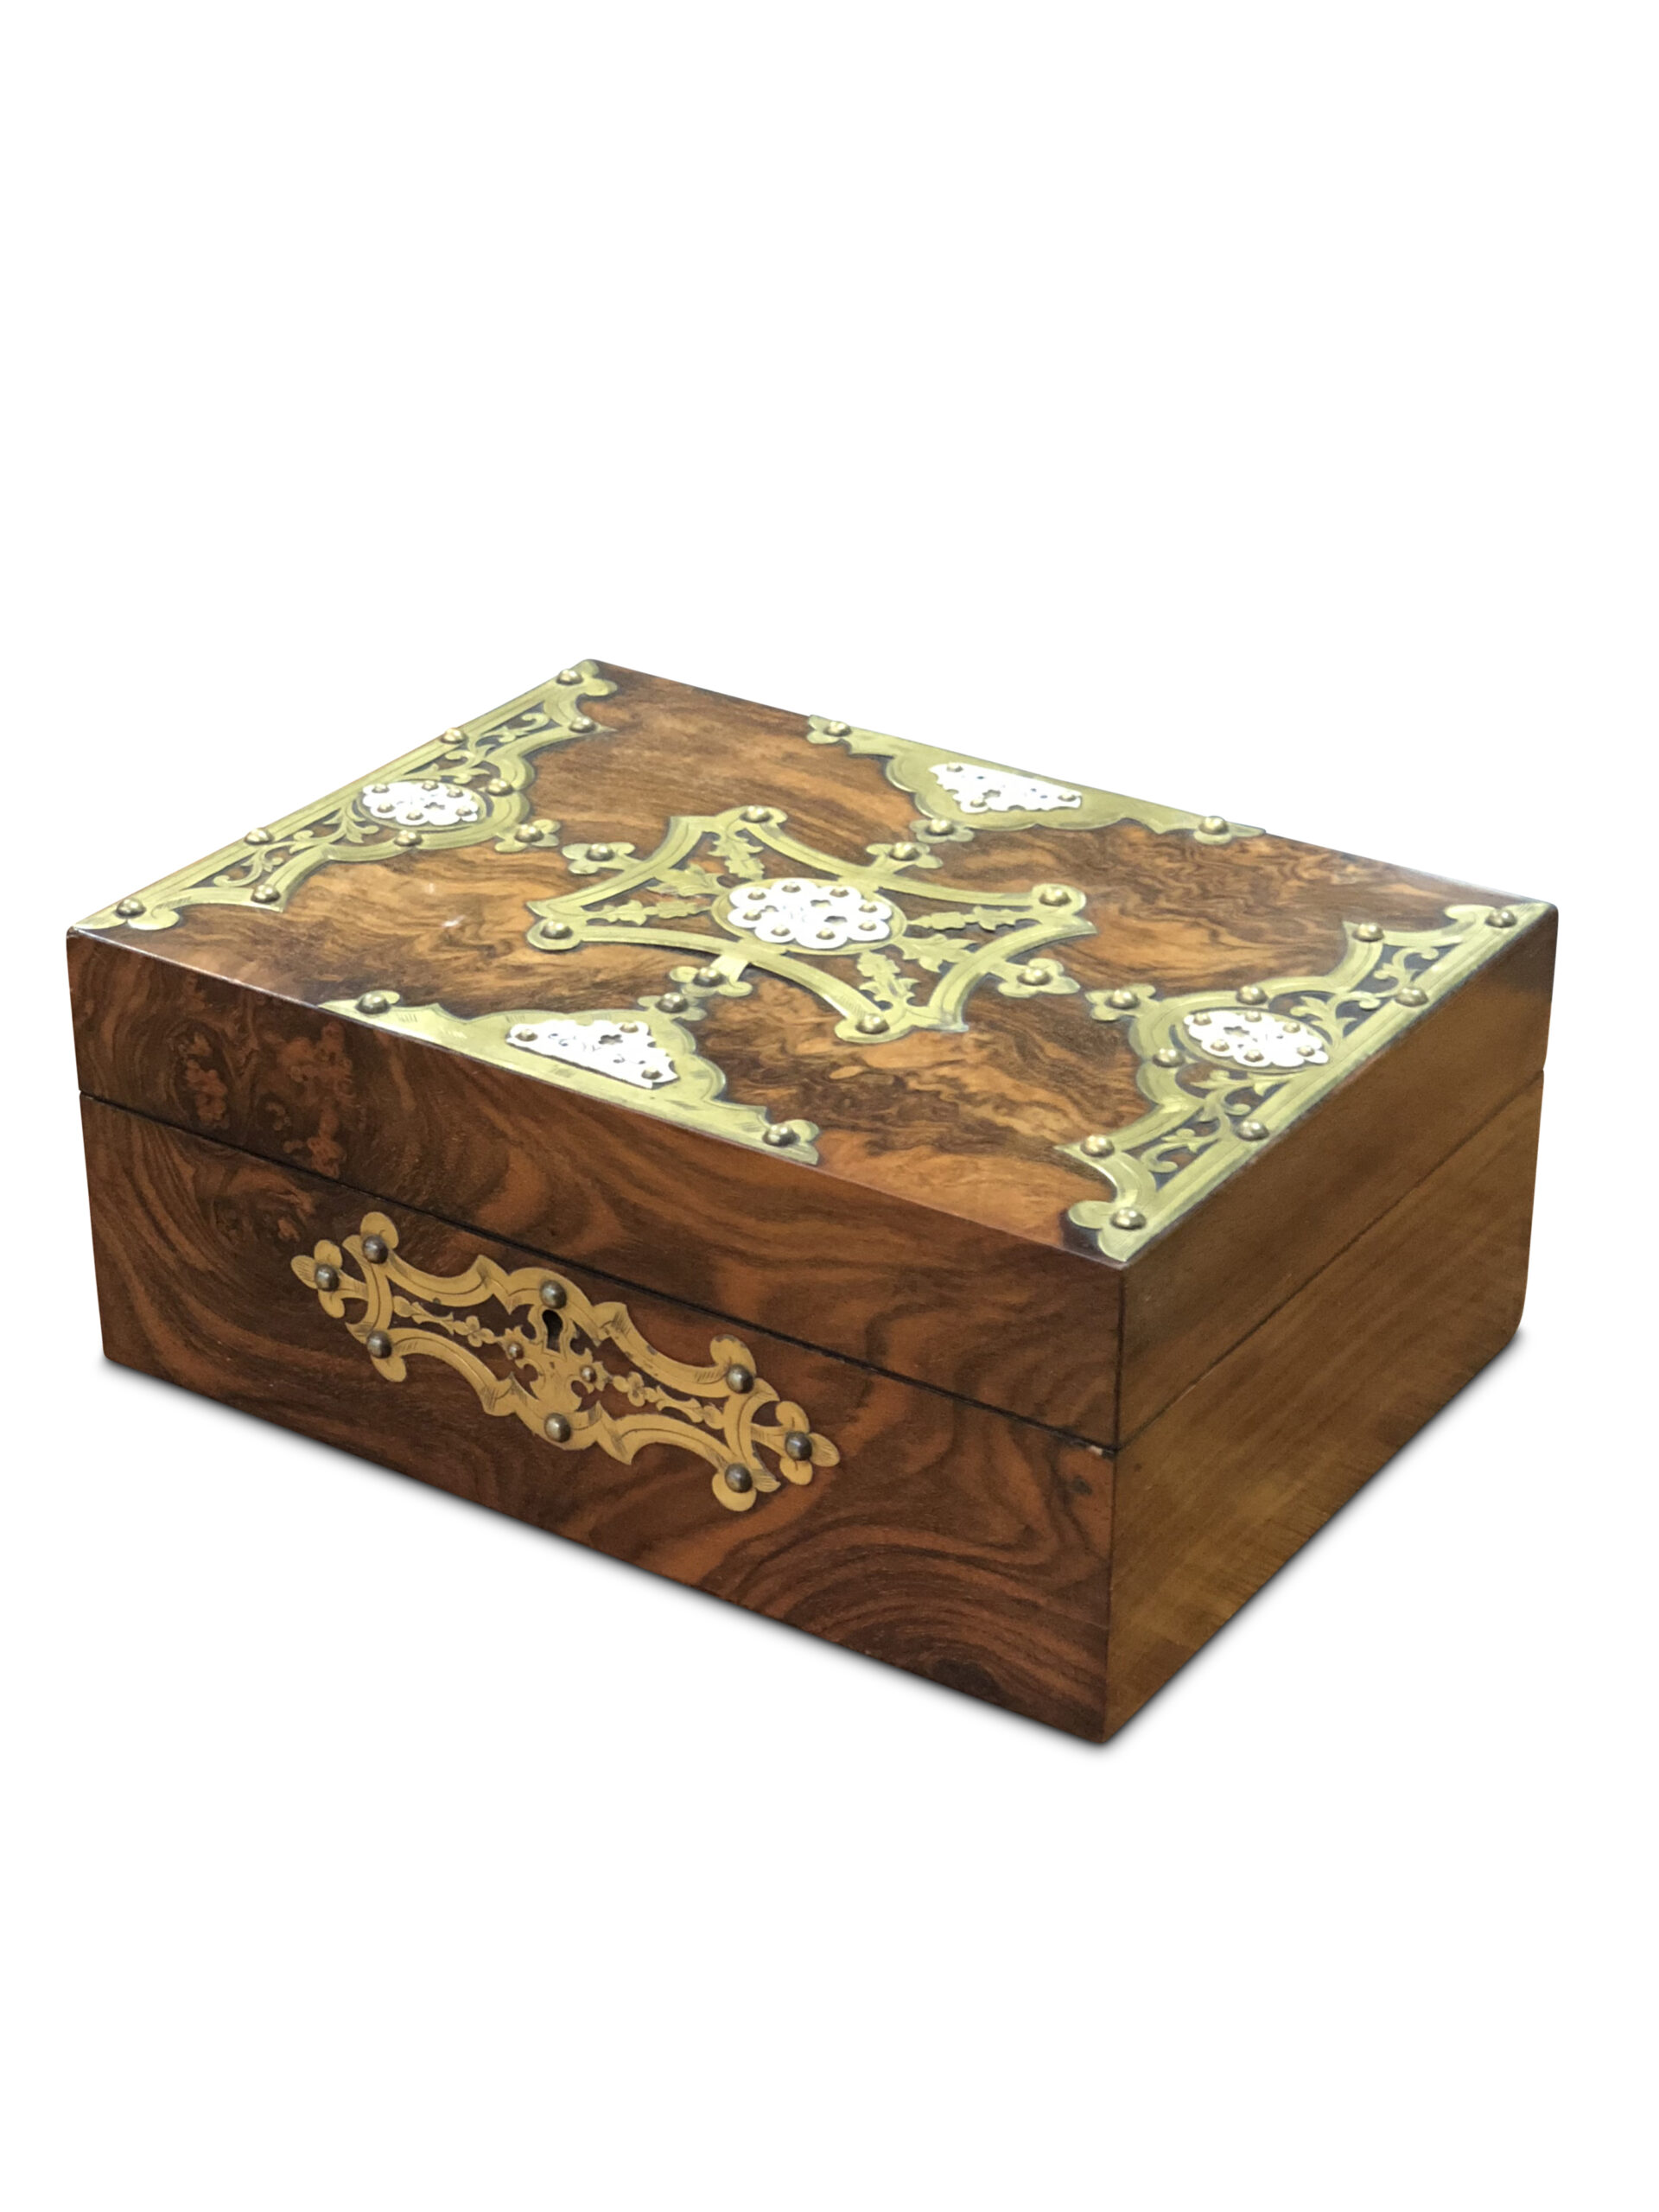 64007 Victorian Burr Walnut Sewing Box with Decorative Bone and Brass Mounts scaled